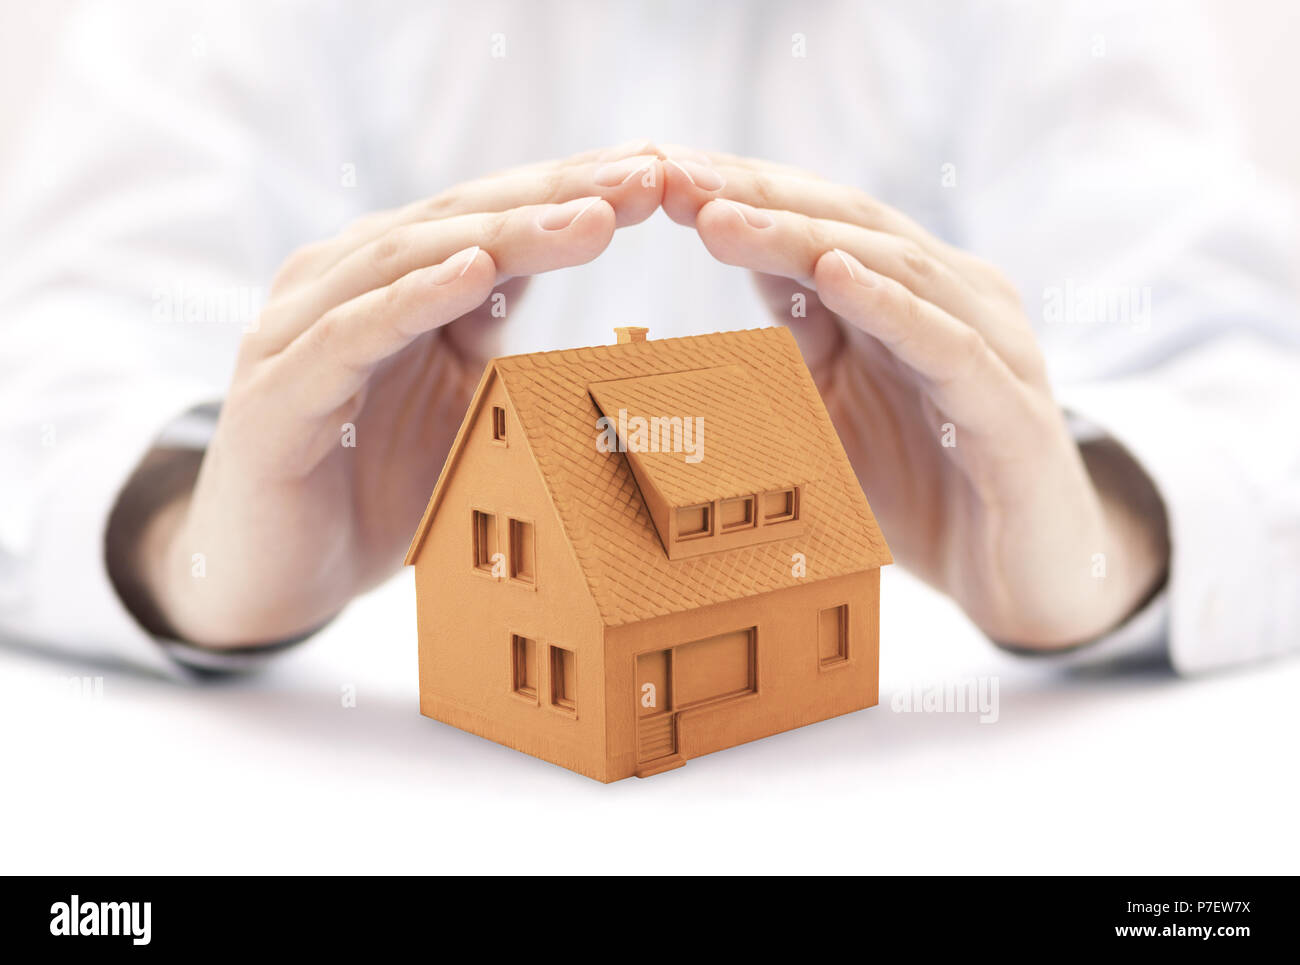 Small orange house in hands Stock Photo